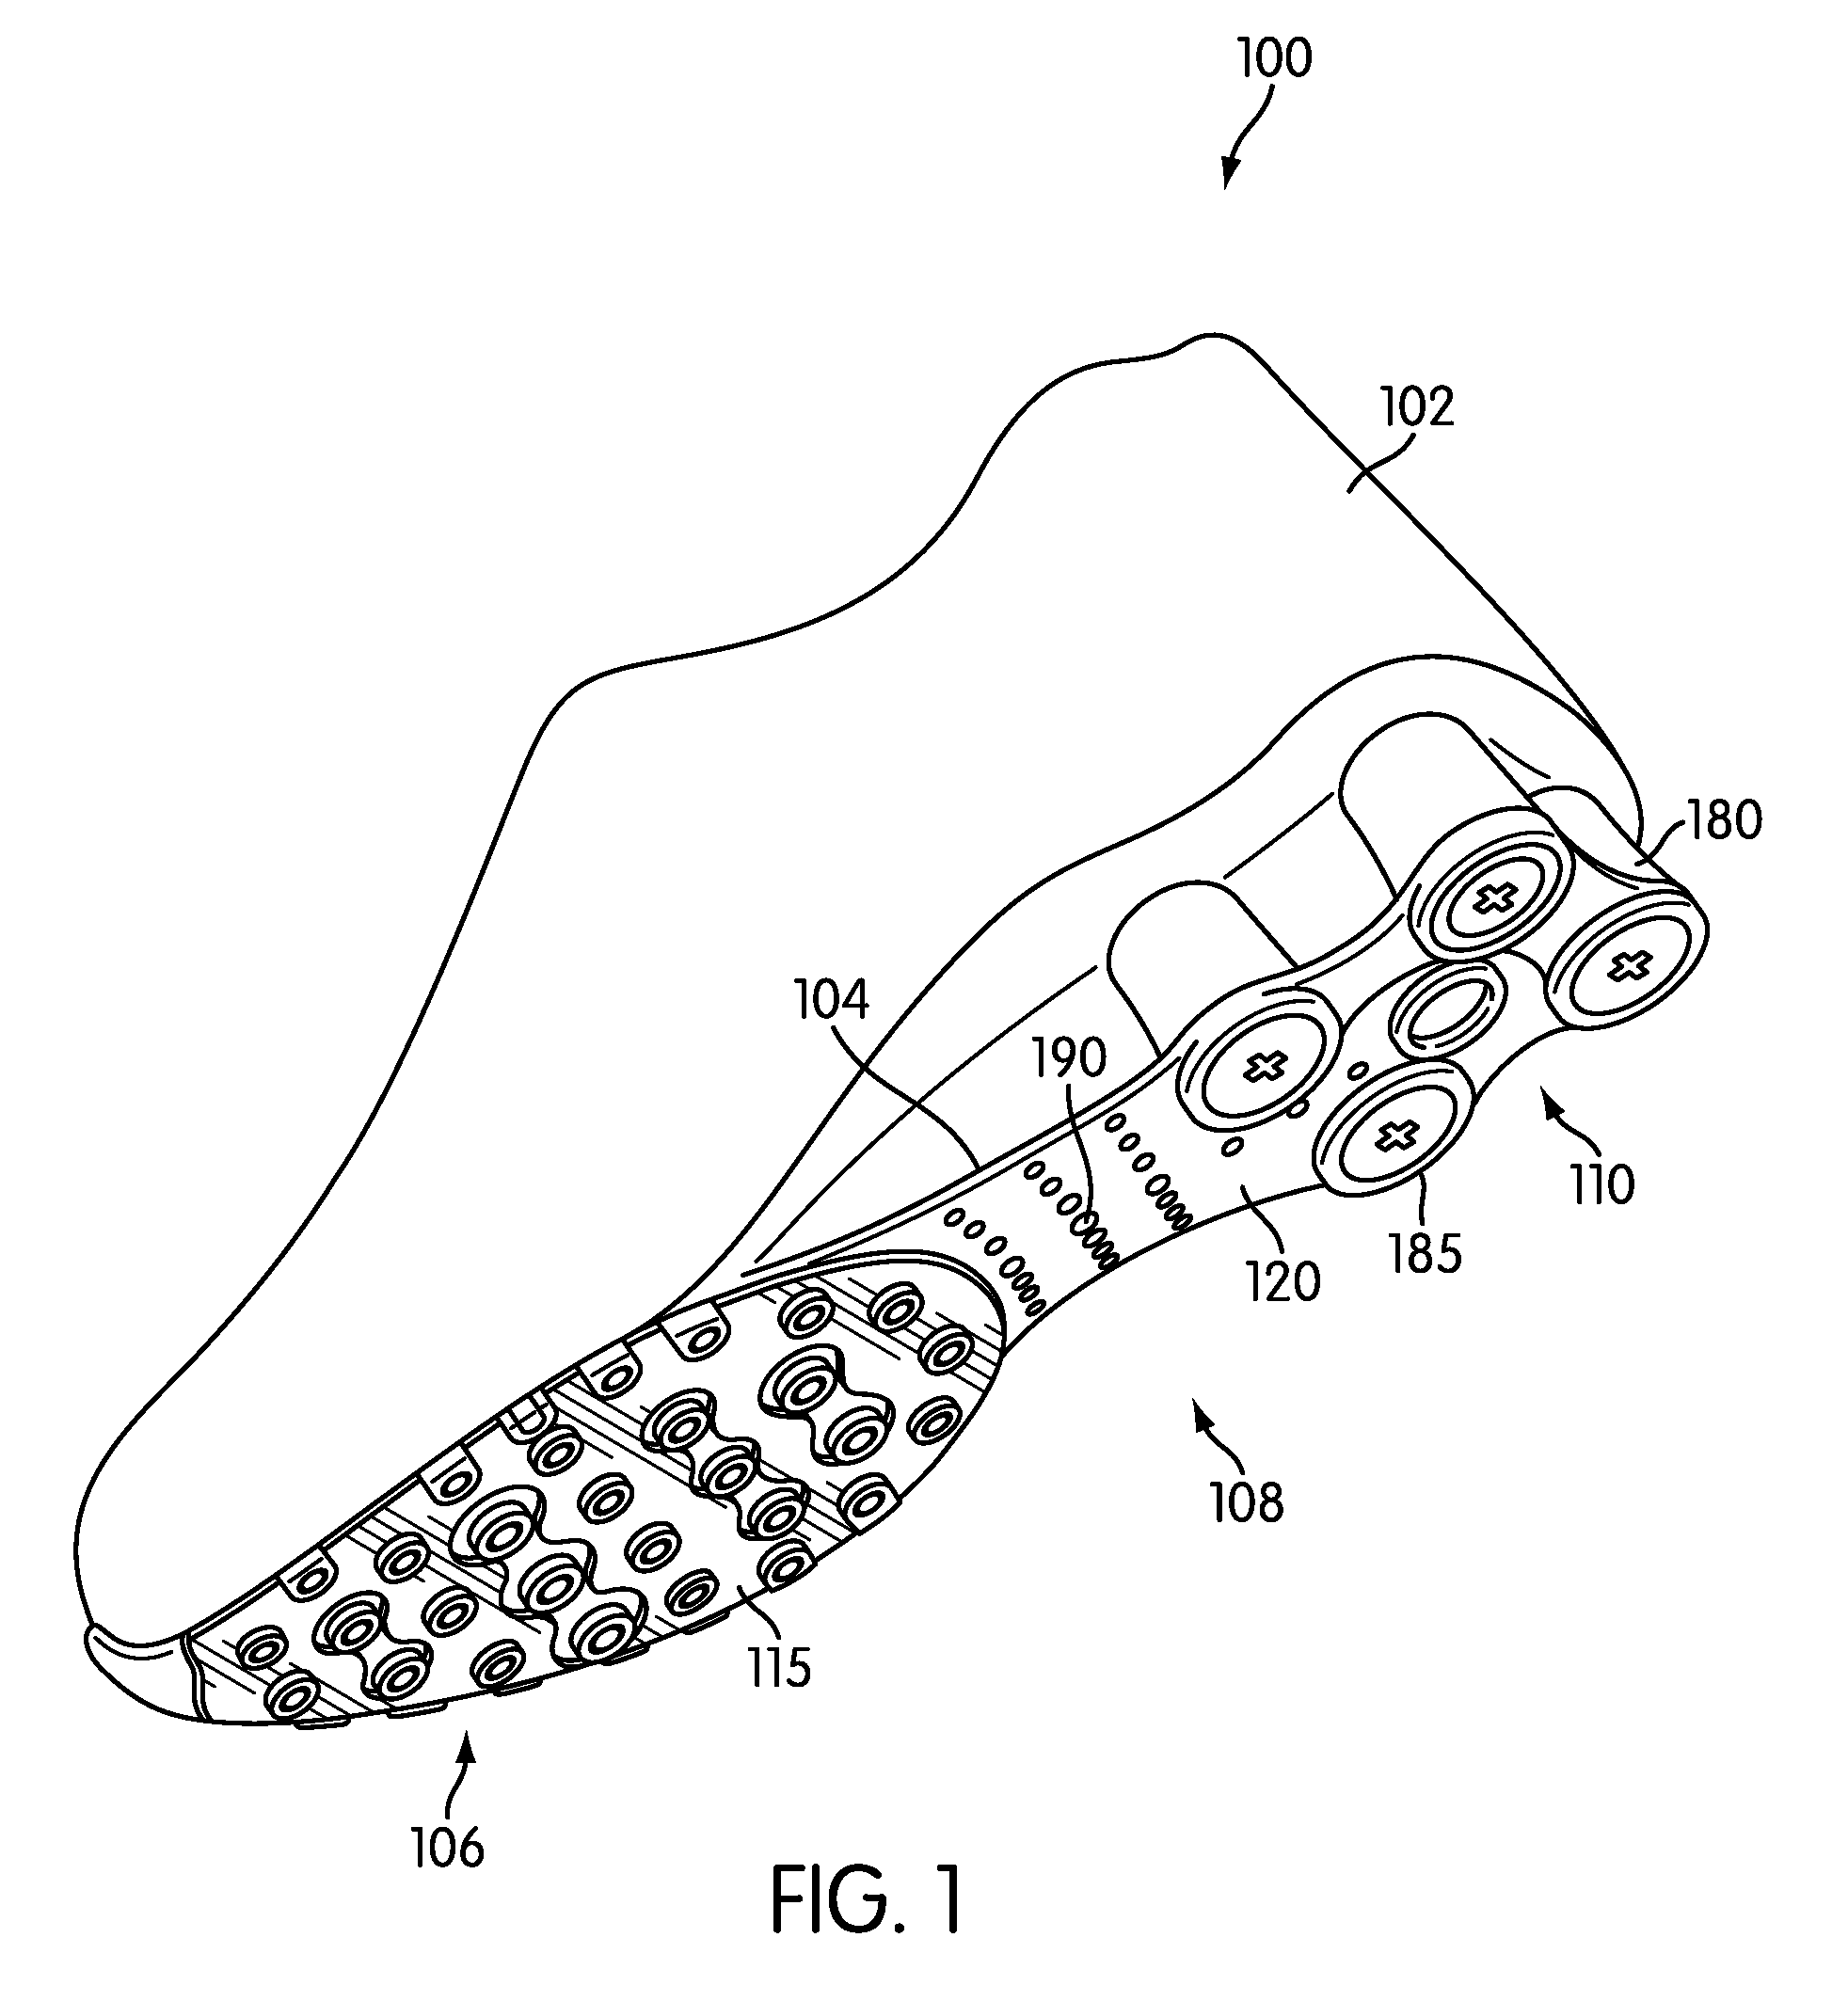 Article of footwear including a reflective outsole